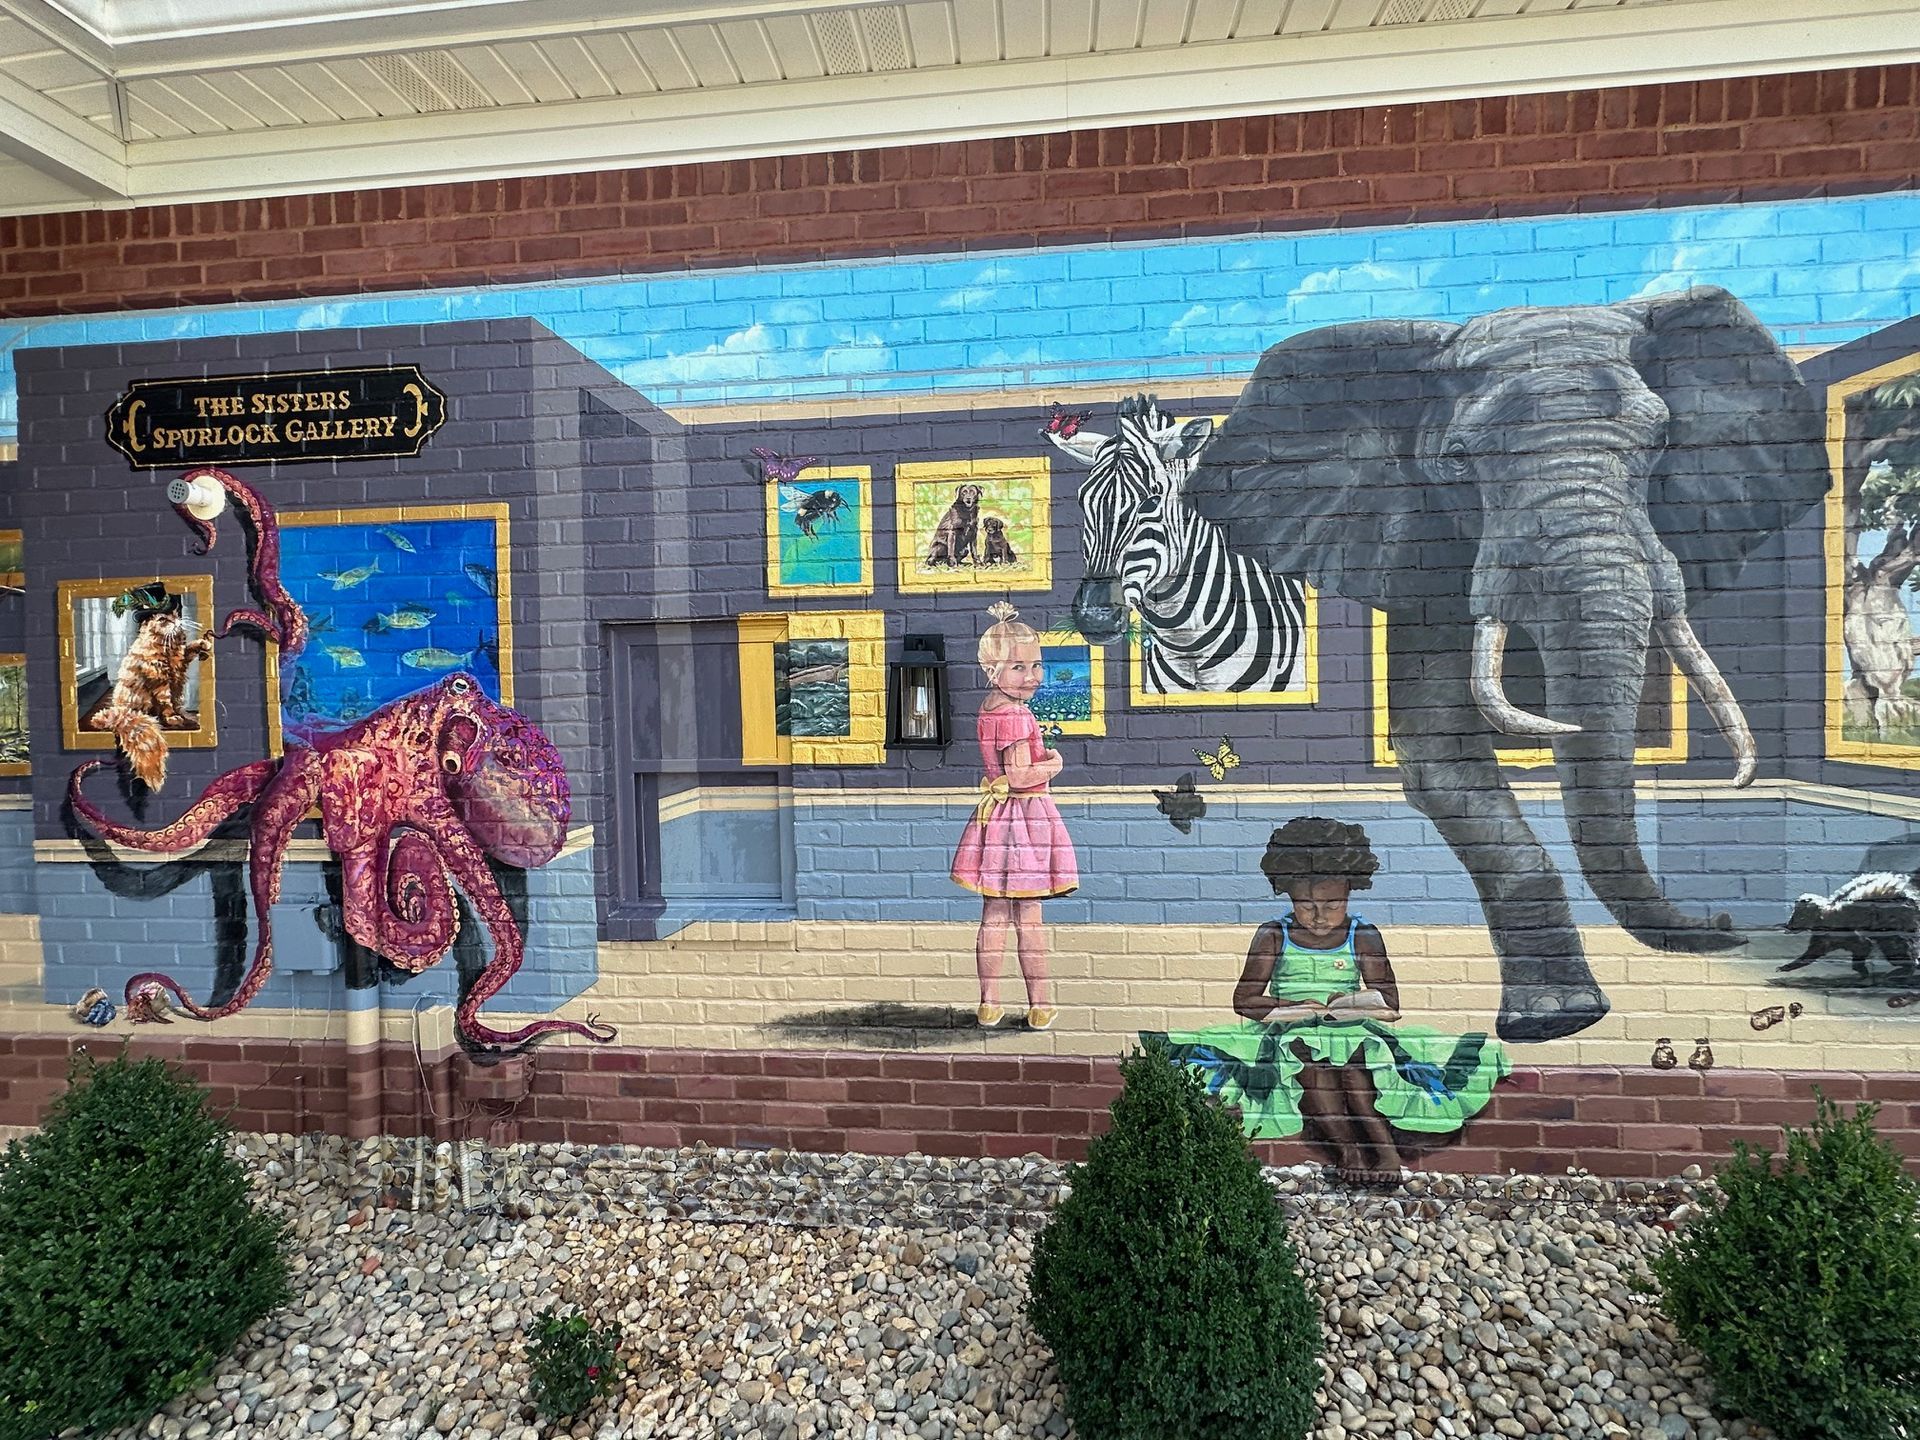 Center Focus of Painting Characters in Her Books Painted on This Exterior Brick Wall - Exterior and Residential Mural Art